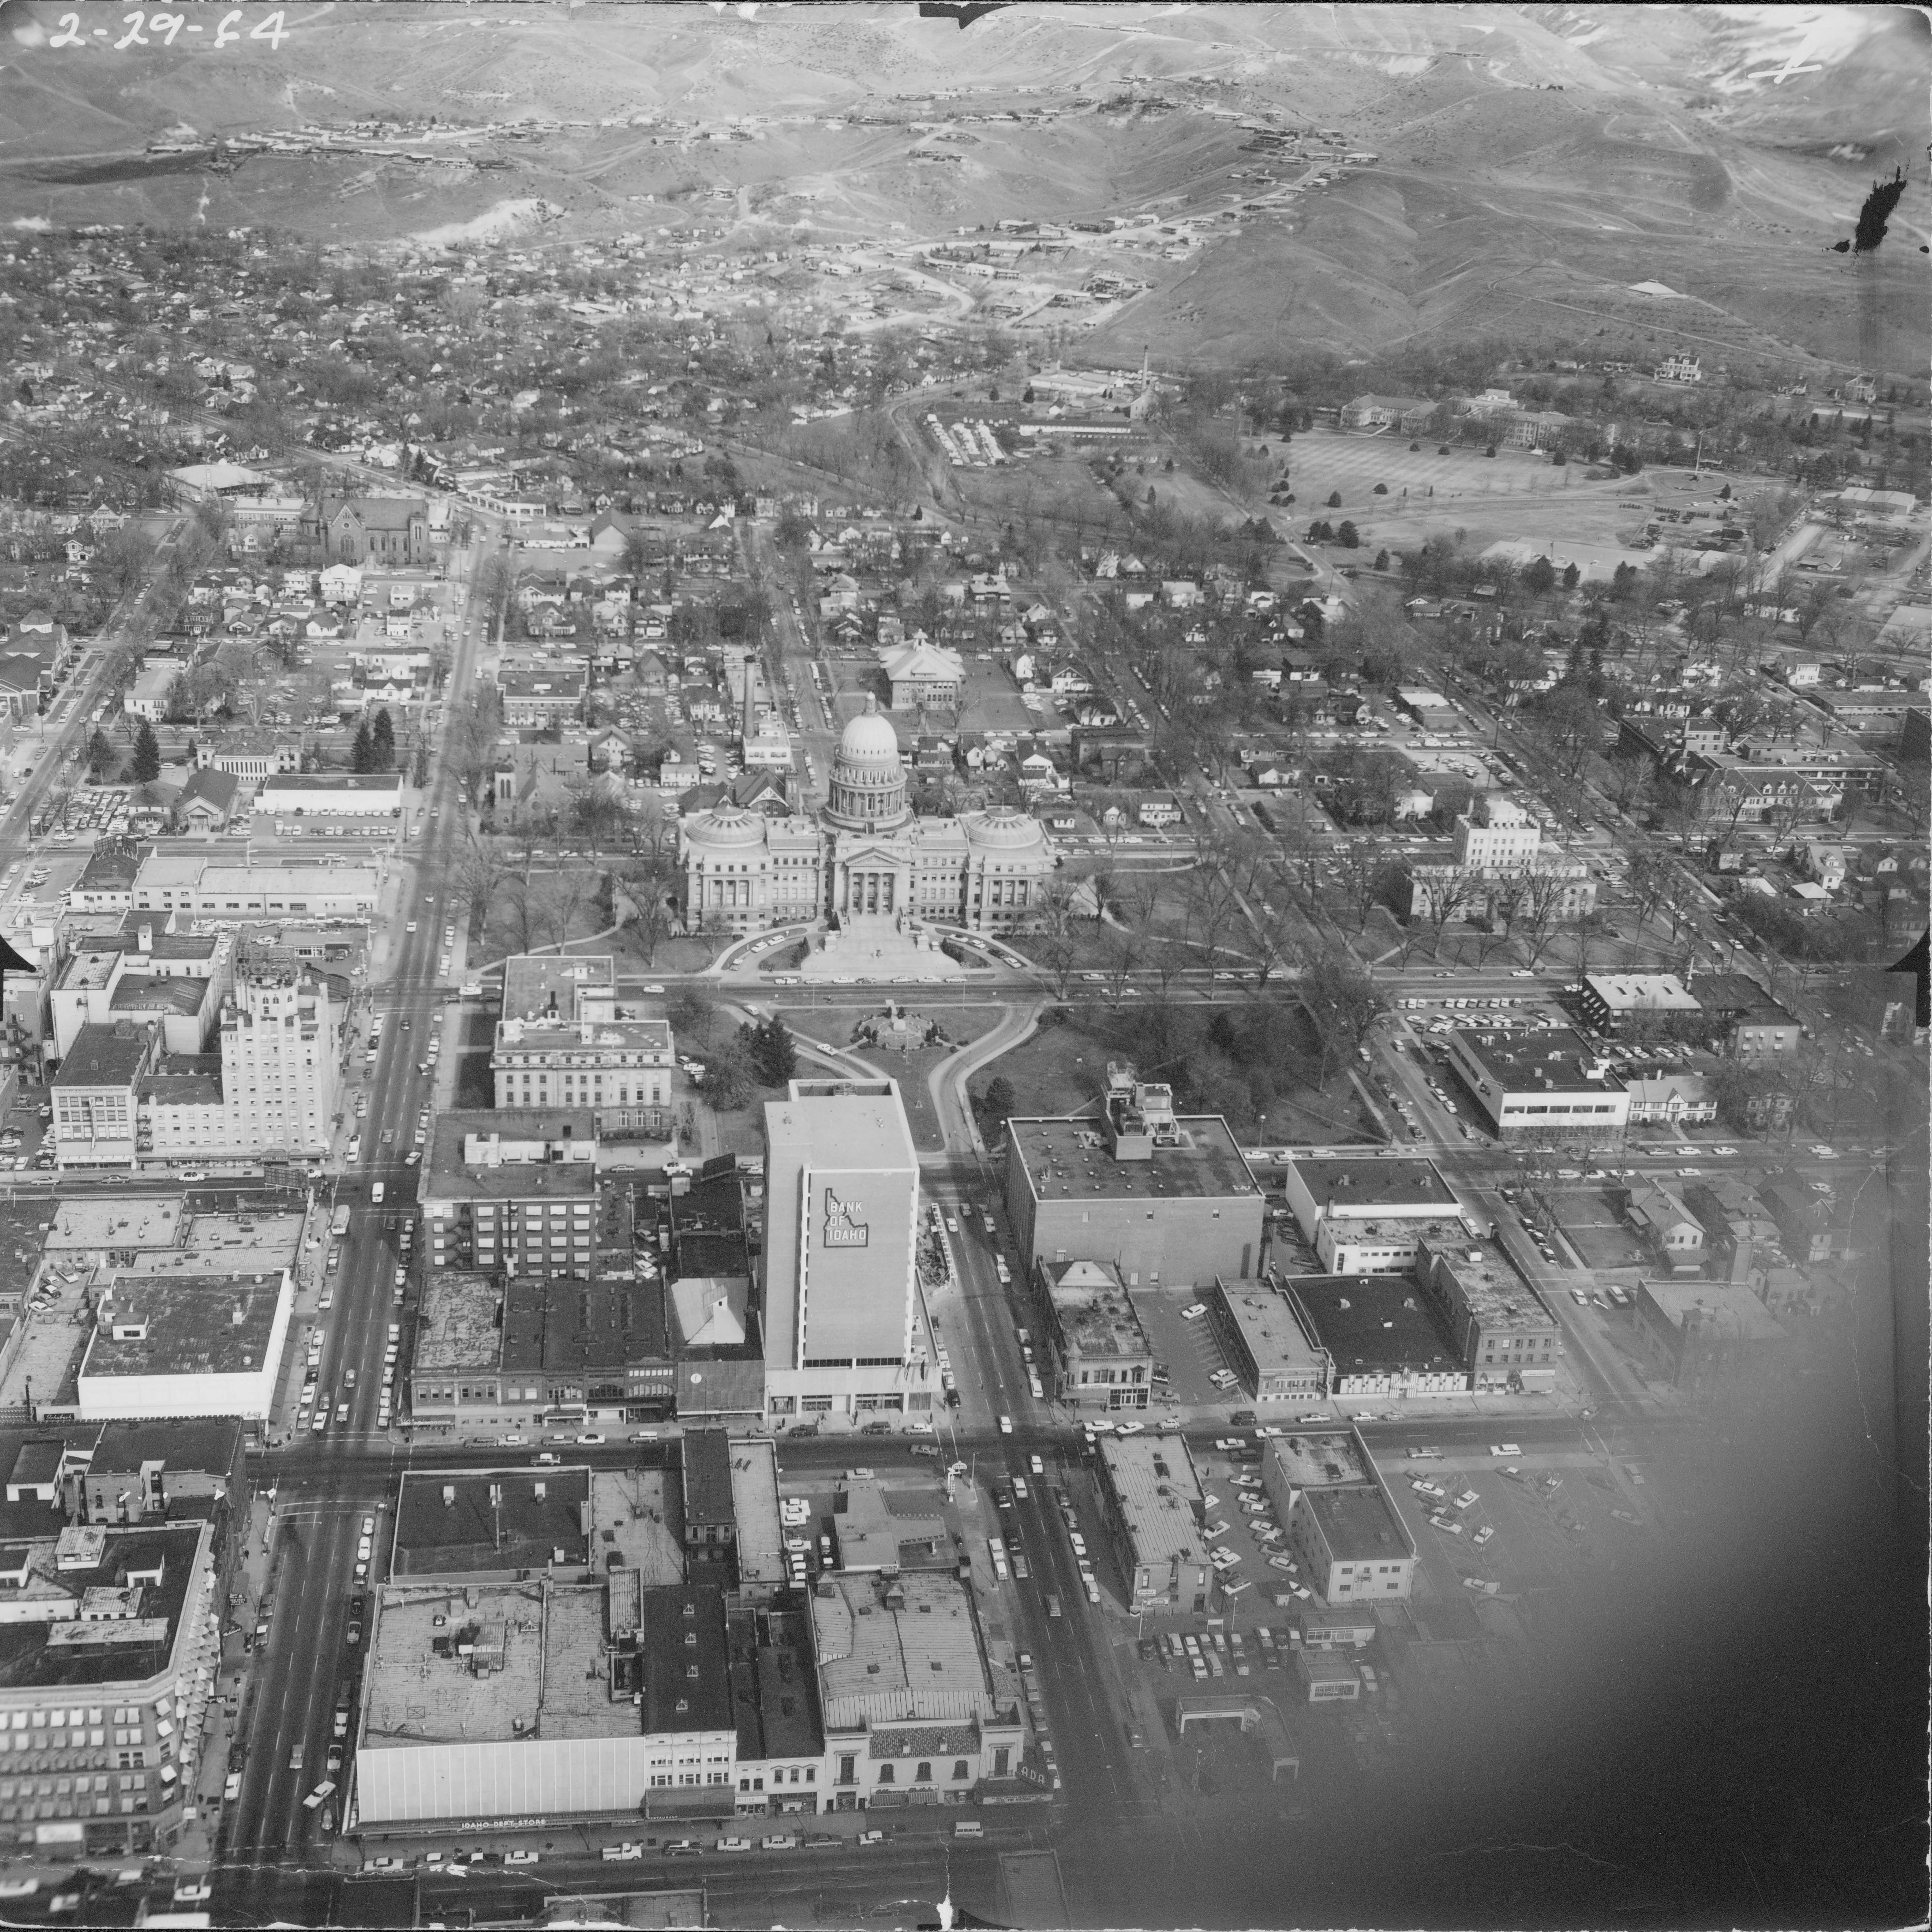 City of Boise aerial photo